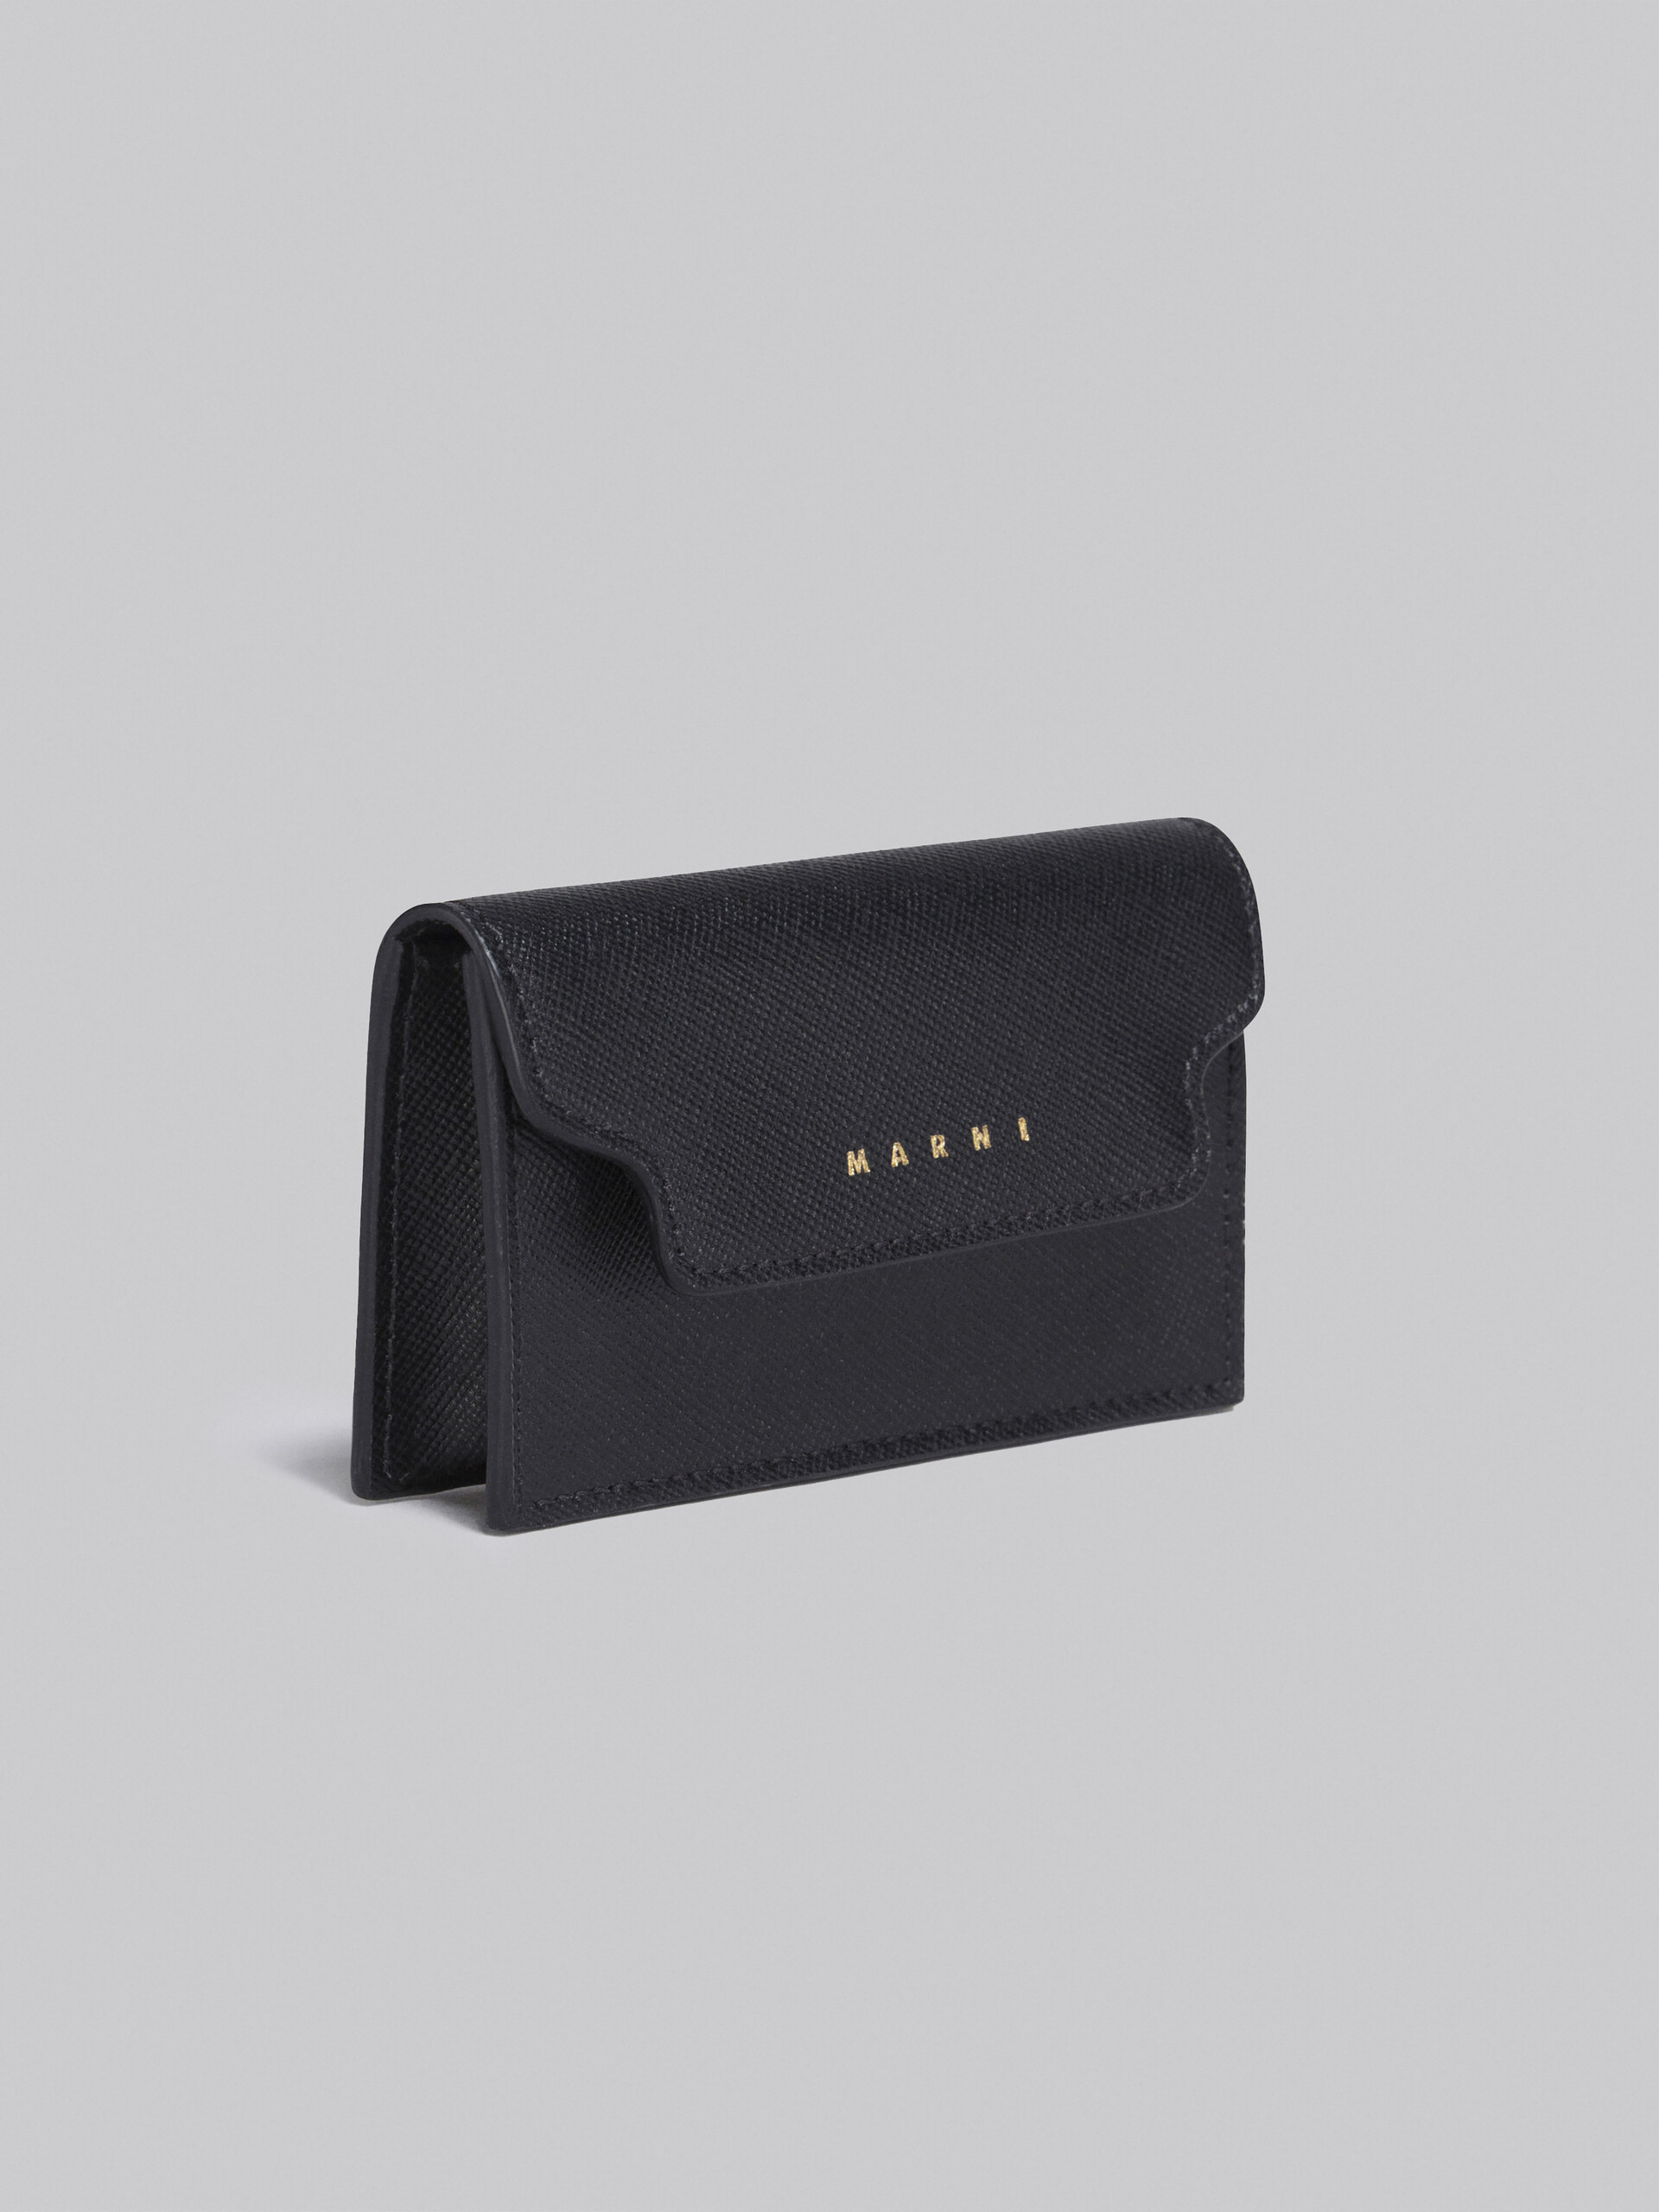 Black saffiano leather business card case - Wallets - Image 3